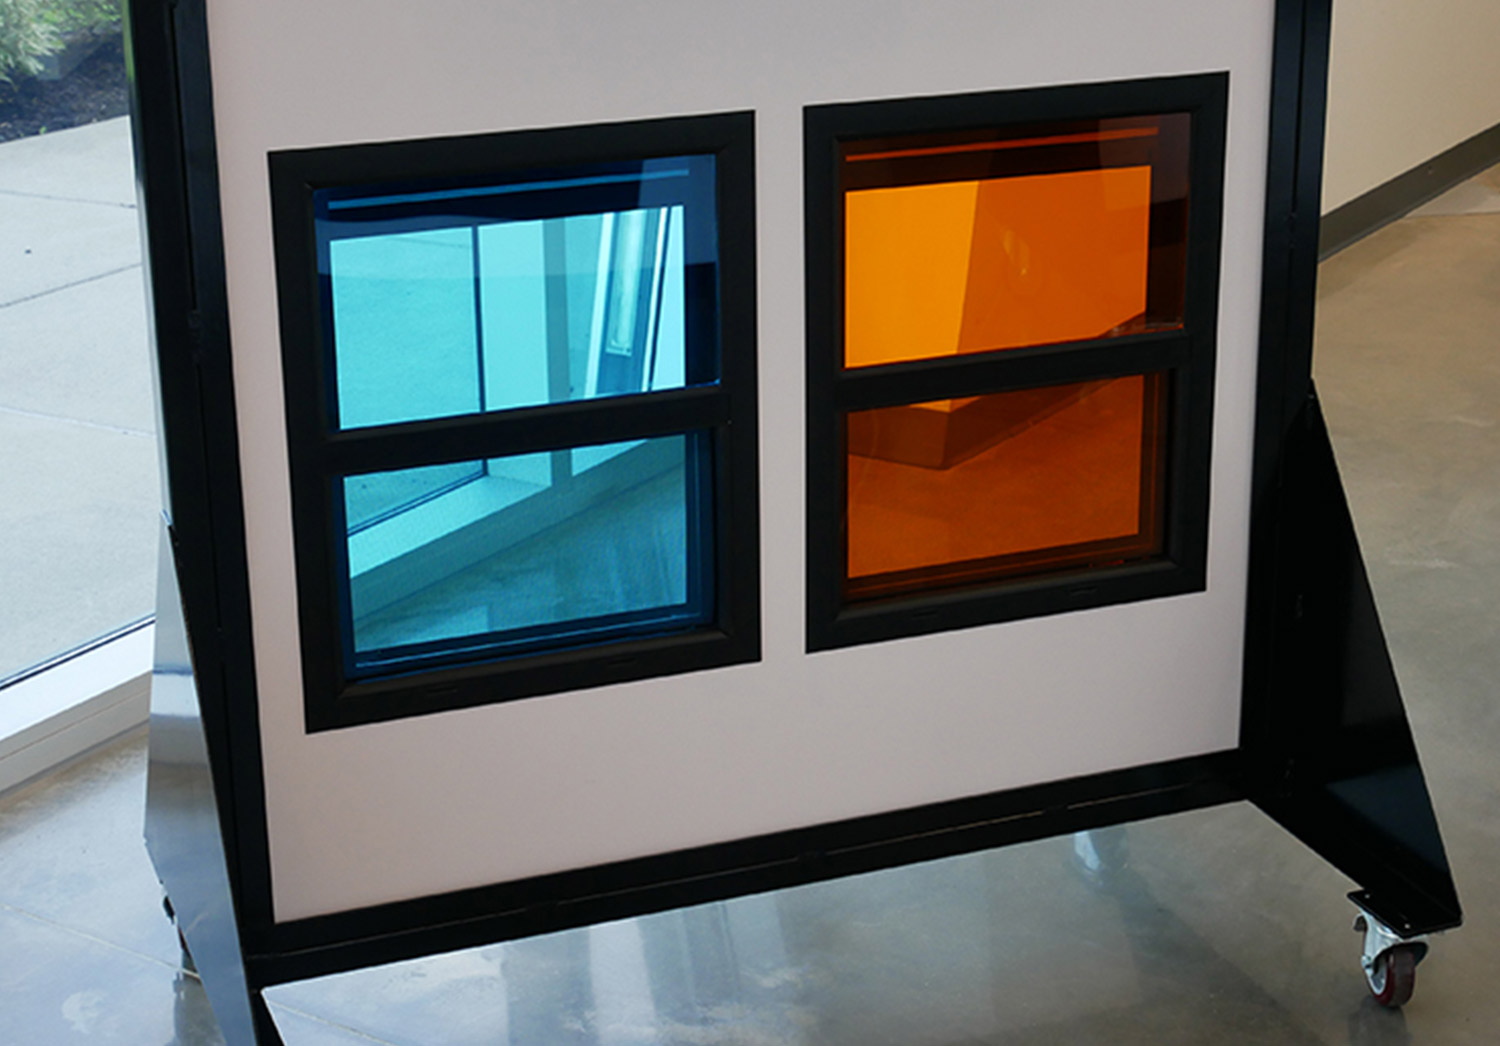 a rolling display that features two Lippert designed automotive-style square frameless windows, one with blue glass and another with orange glass